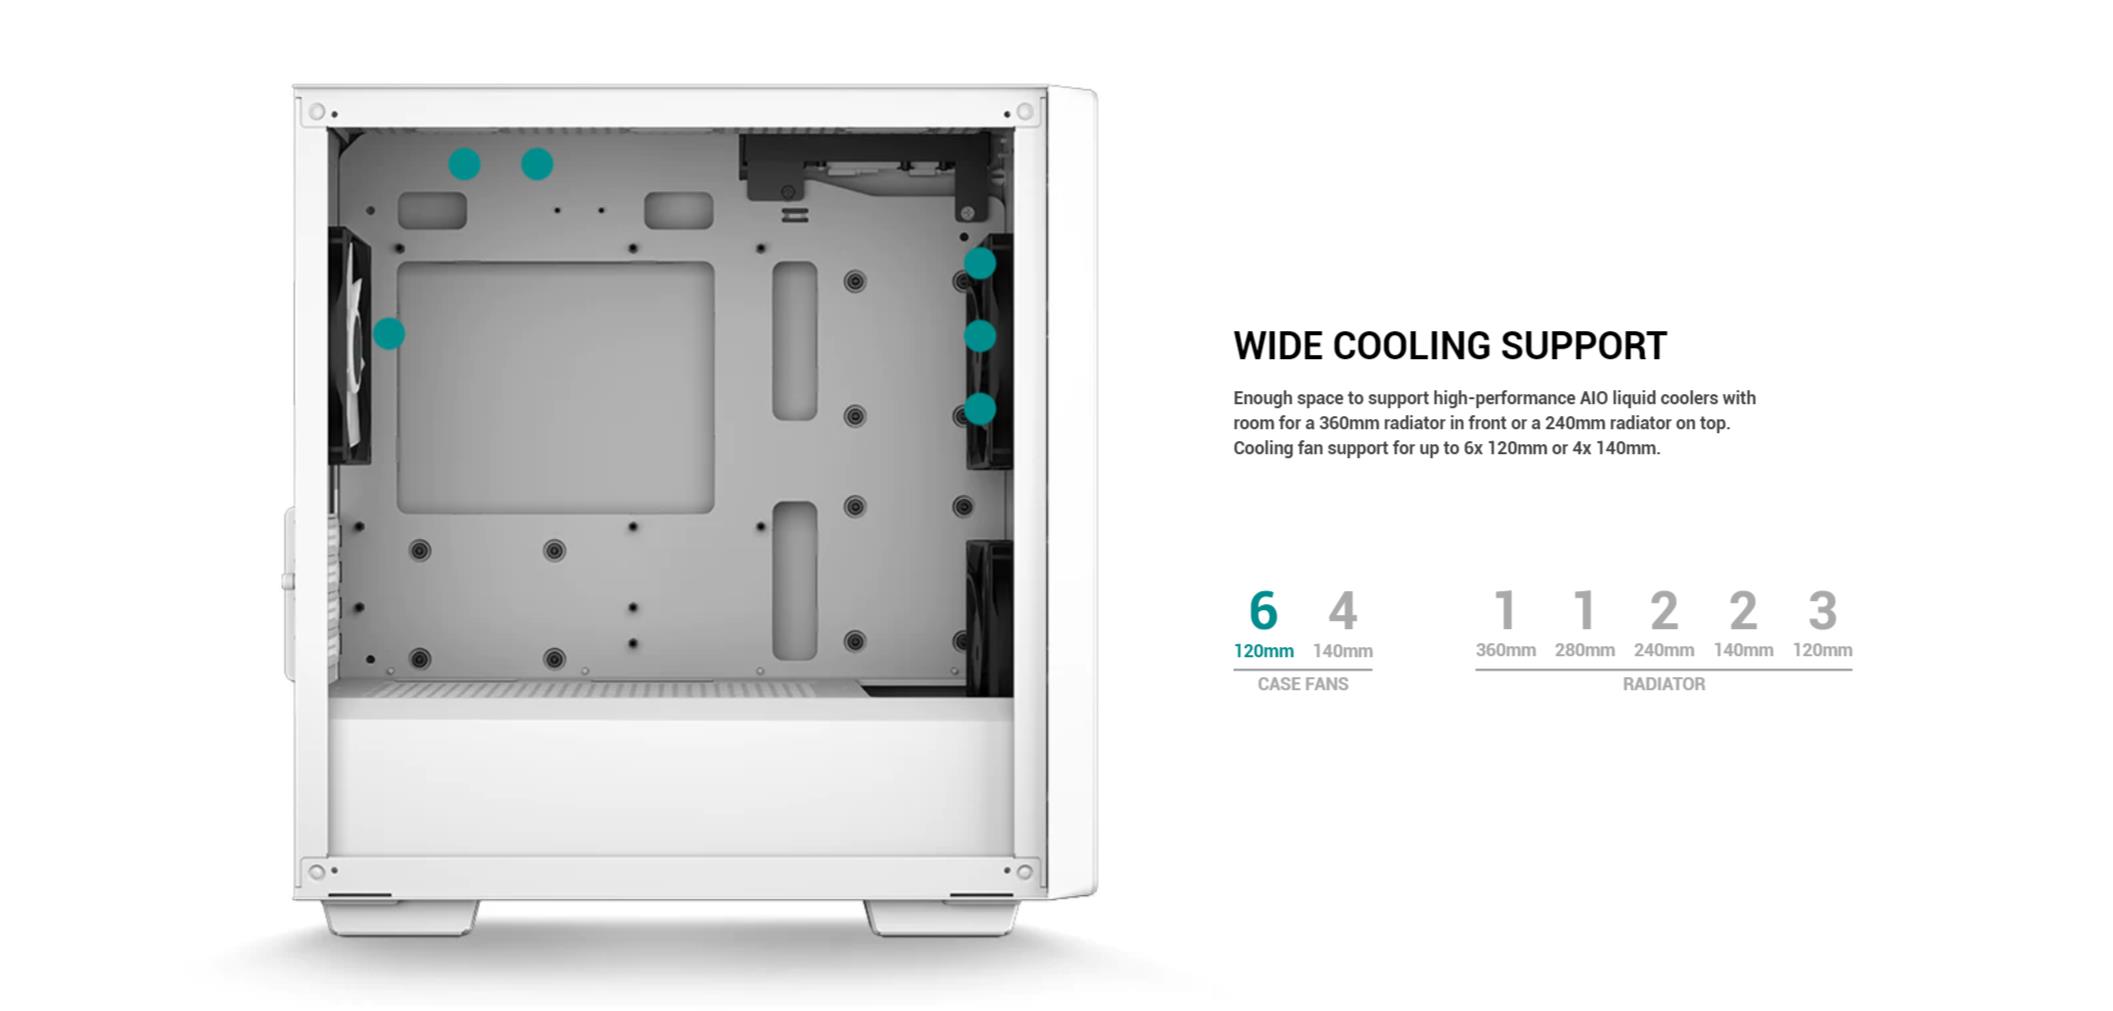 A large marketing image providing additional information about the product DeepCool CC360 ARGB mATX Tower Case - White - Additional alt info not provided